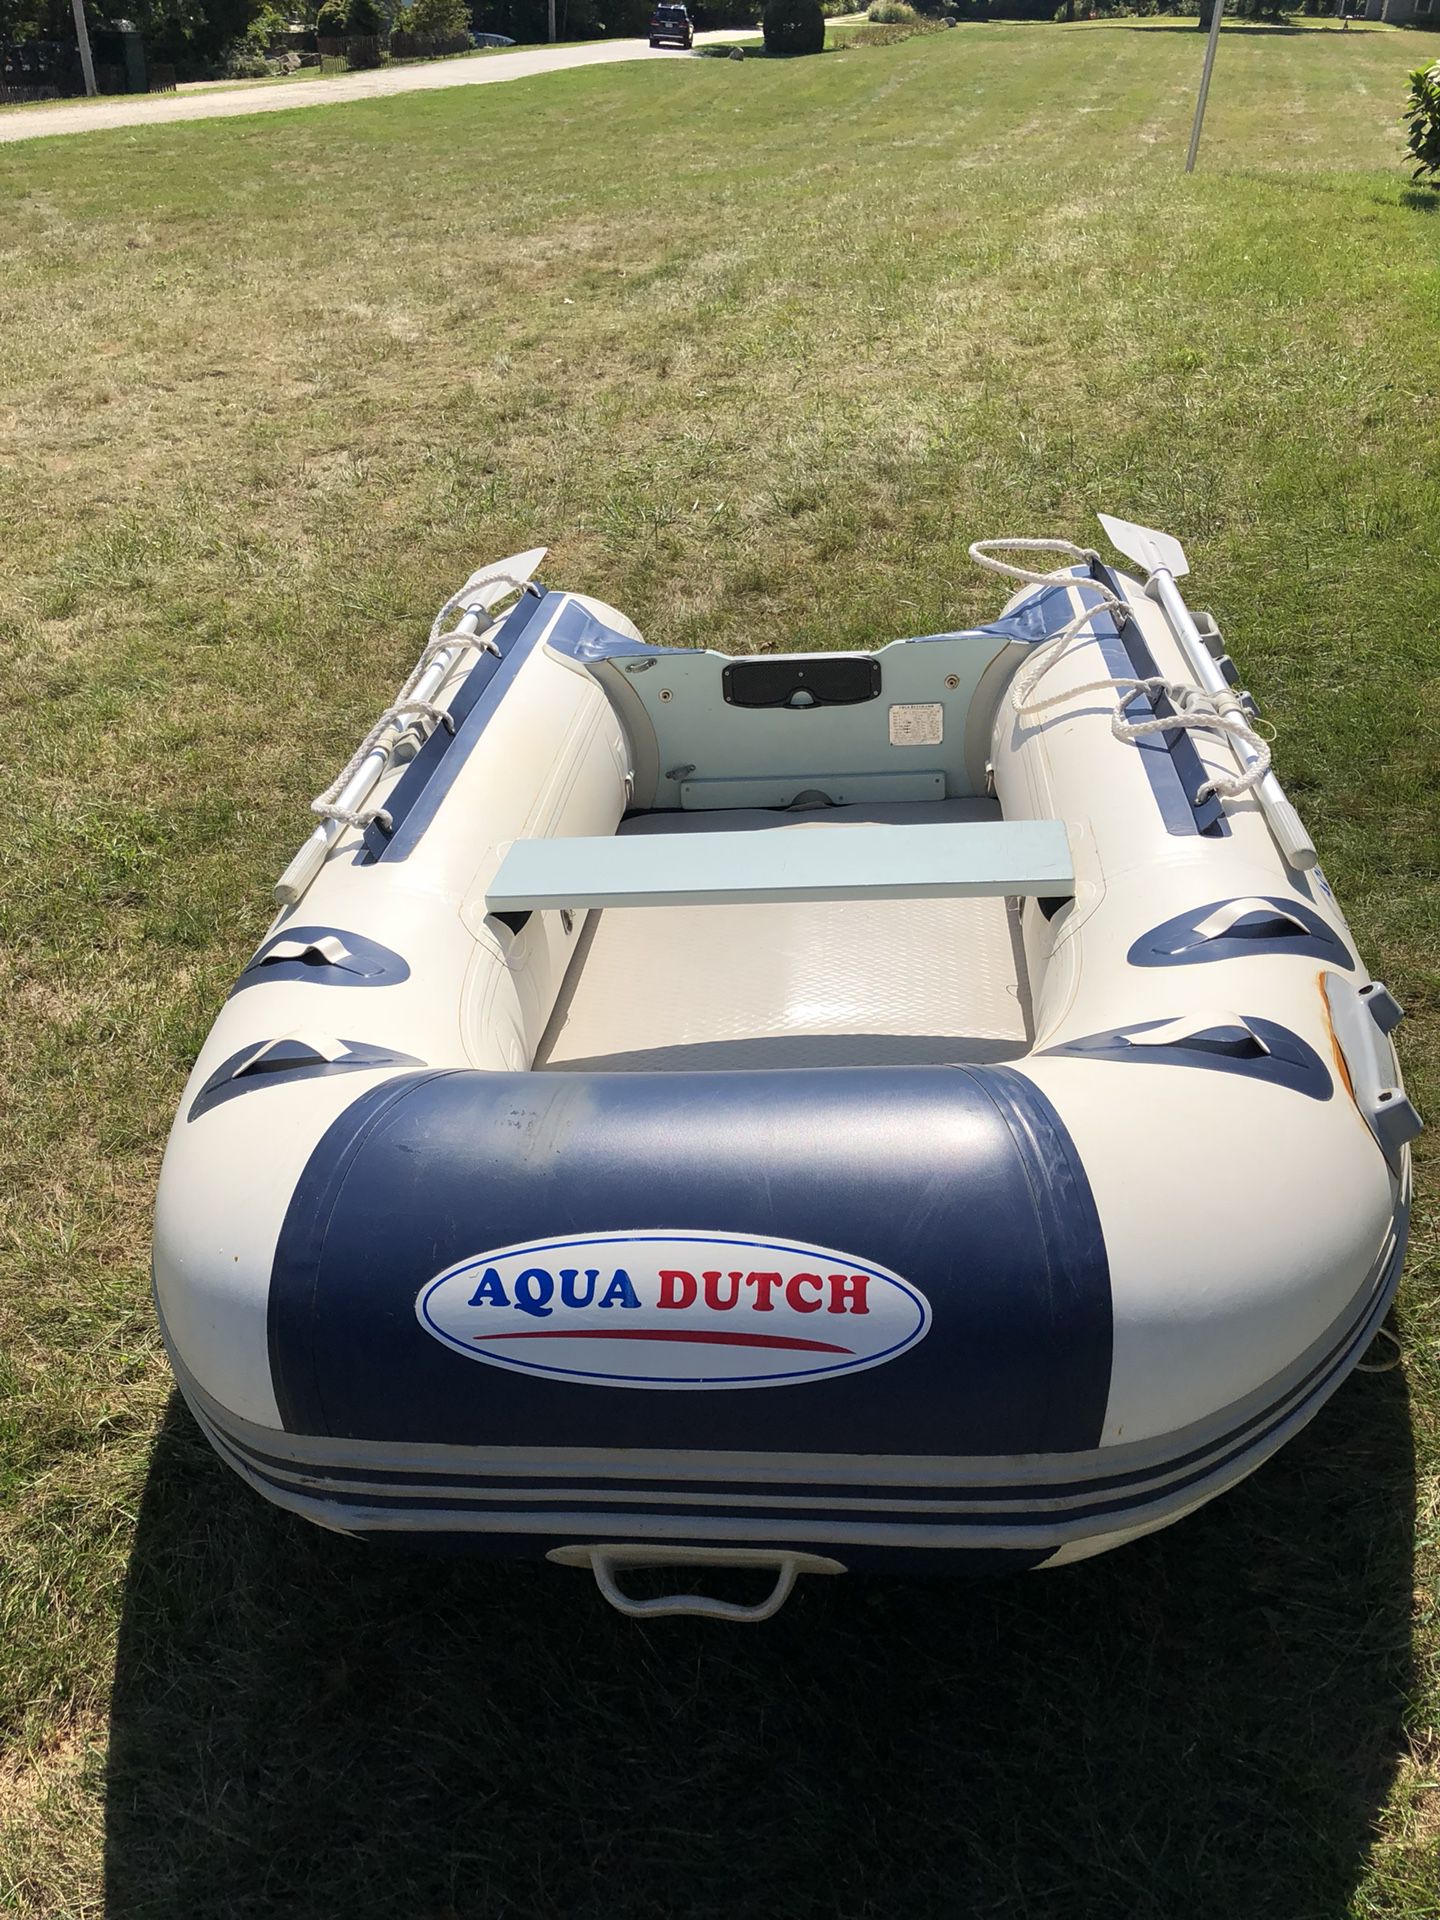 Aqua Dutch inflatable boat-get ready for Spring!